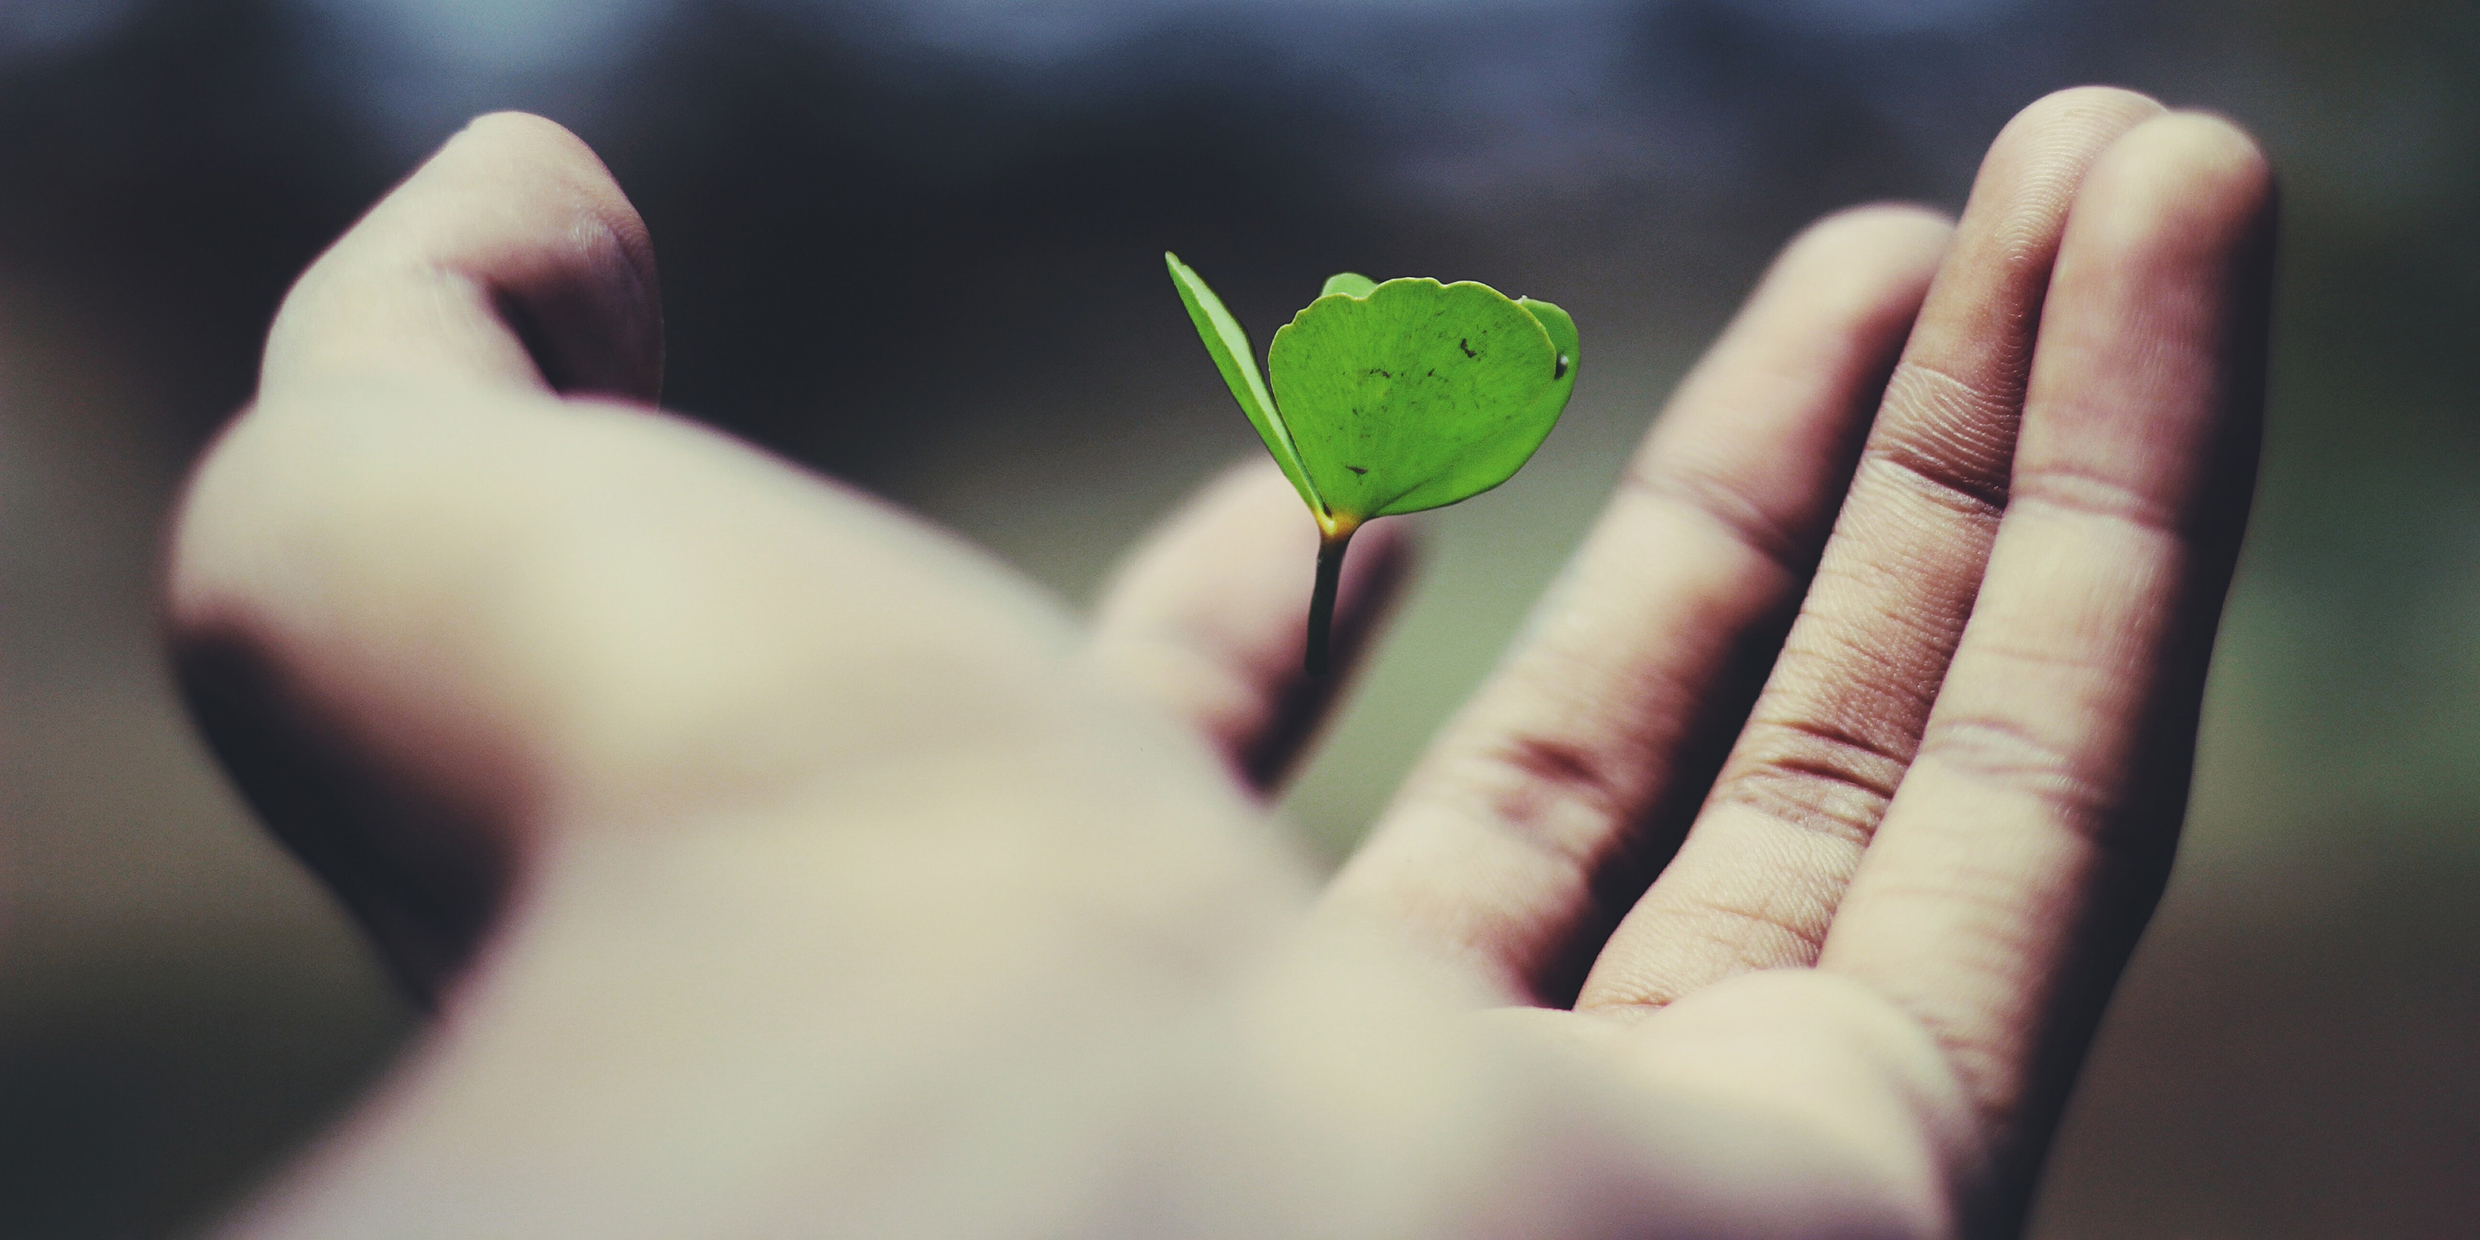 Image of a human hand holding a green plant leaf